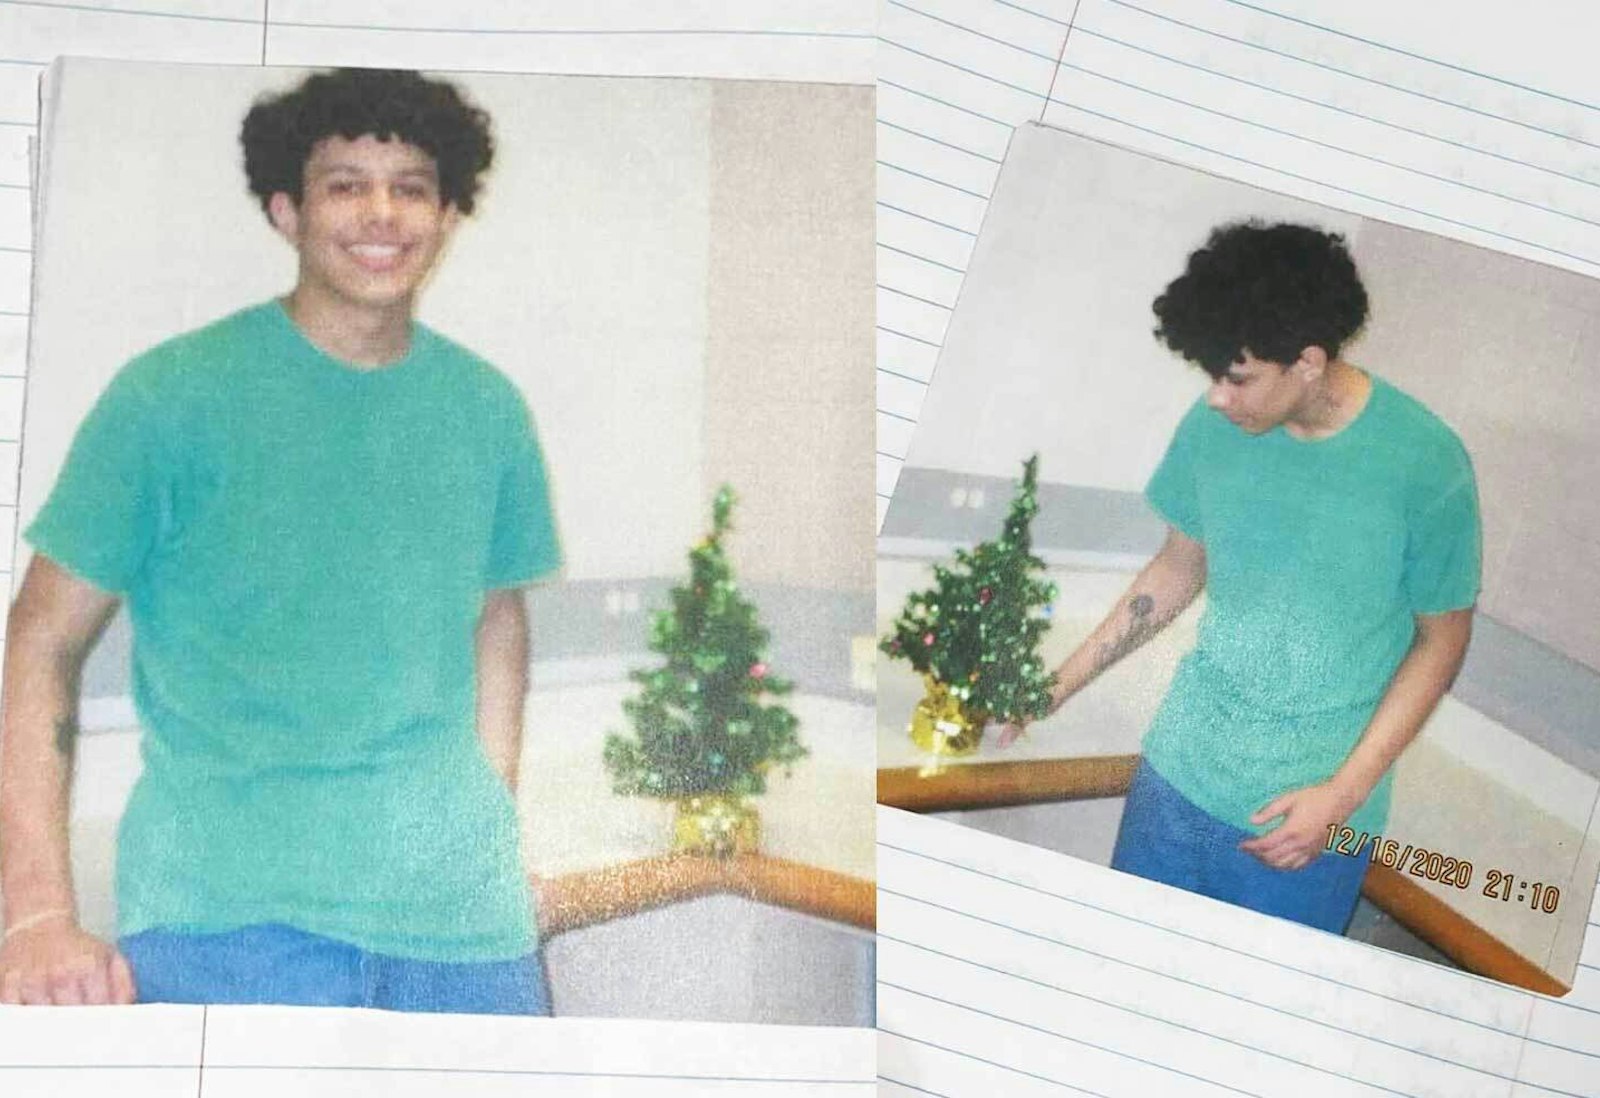 Kaio Bispo at the Cowlitz County Youth Services Center in December 2020, days before his 18th birthday. Shortly afterward, Bispo was transferred to an adult detention facility, the Northwest ICE Processing Center in Tacoma, Wash.